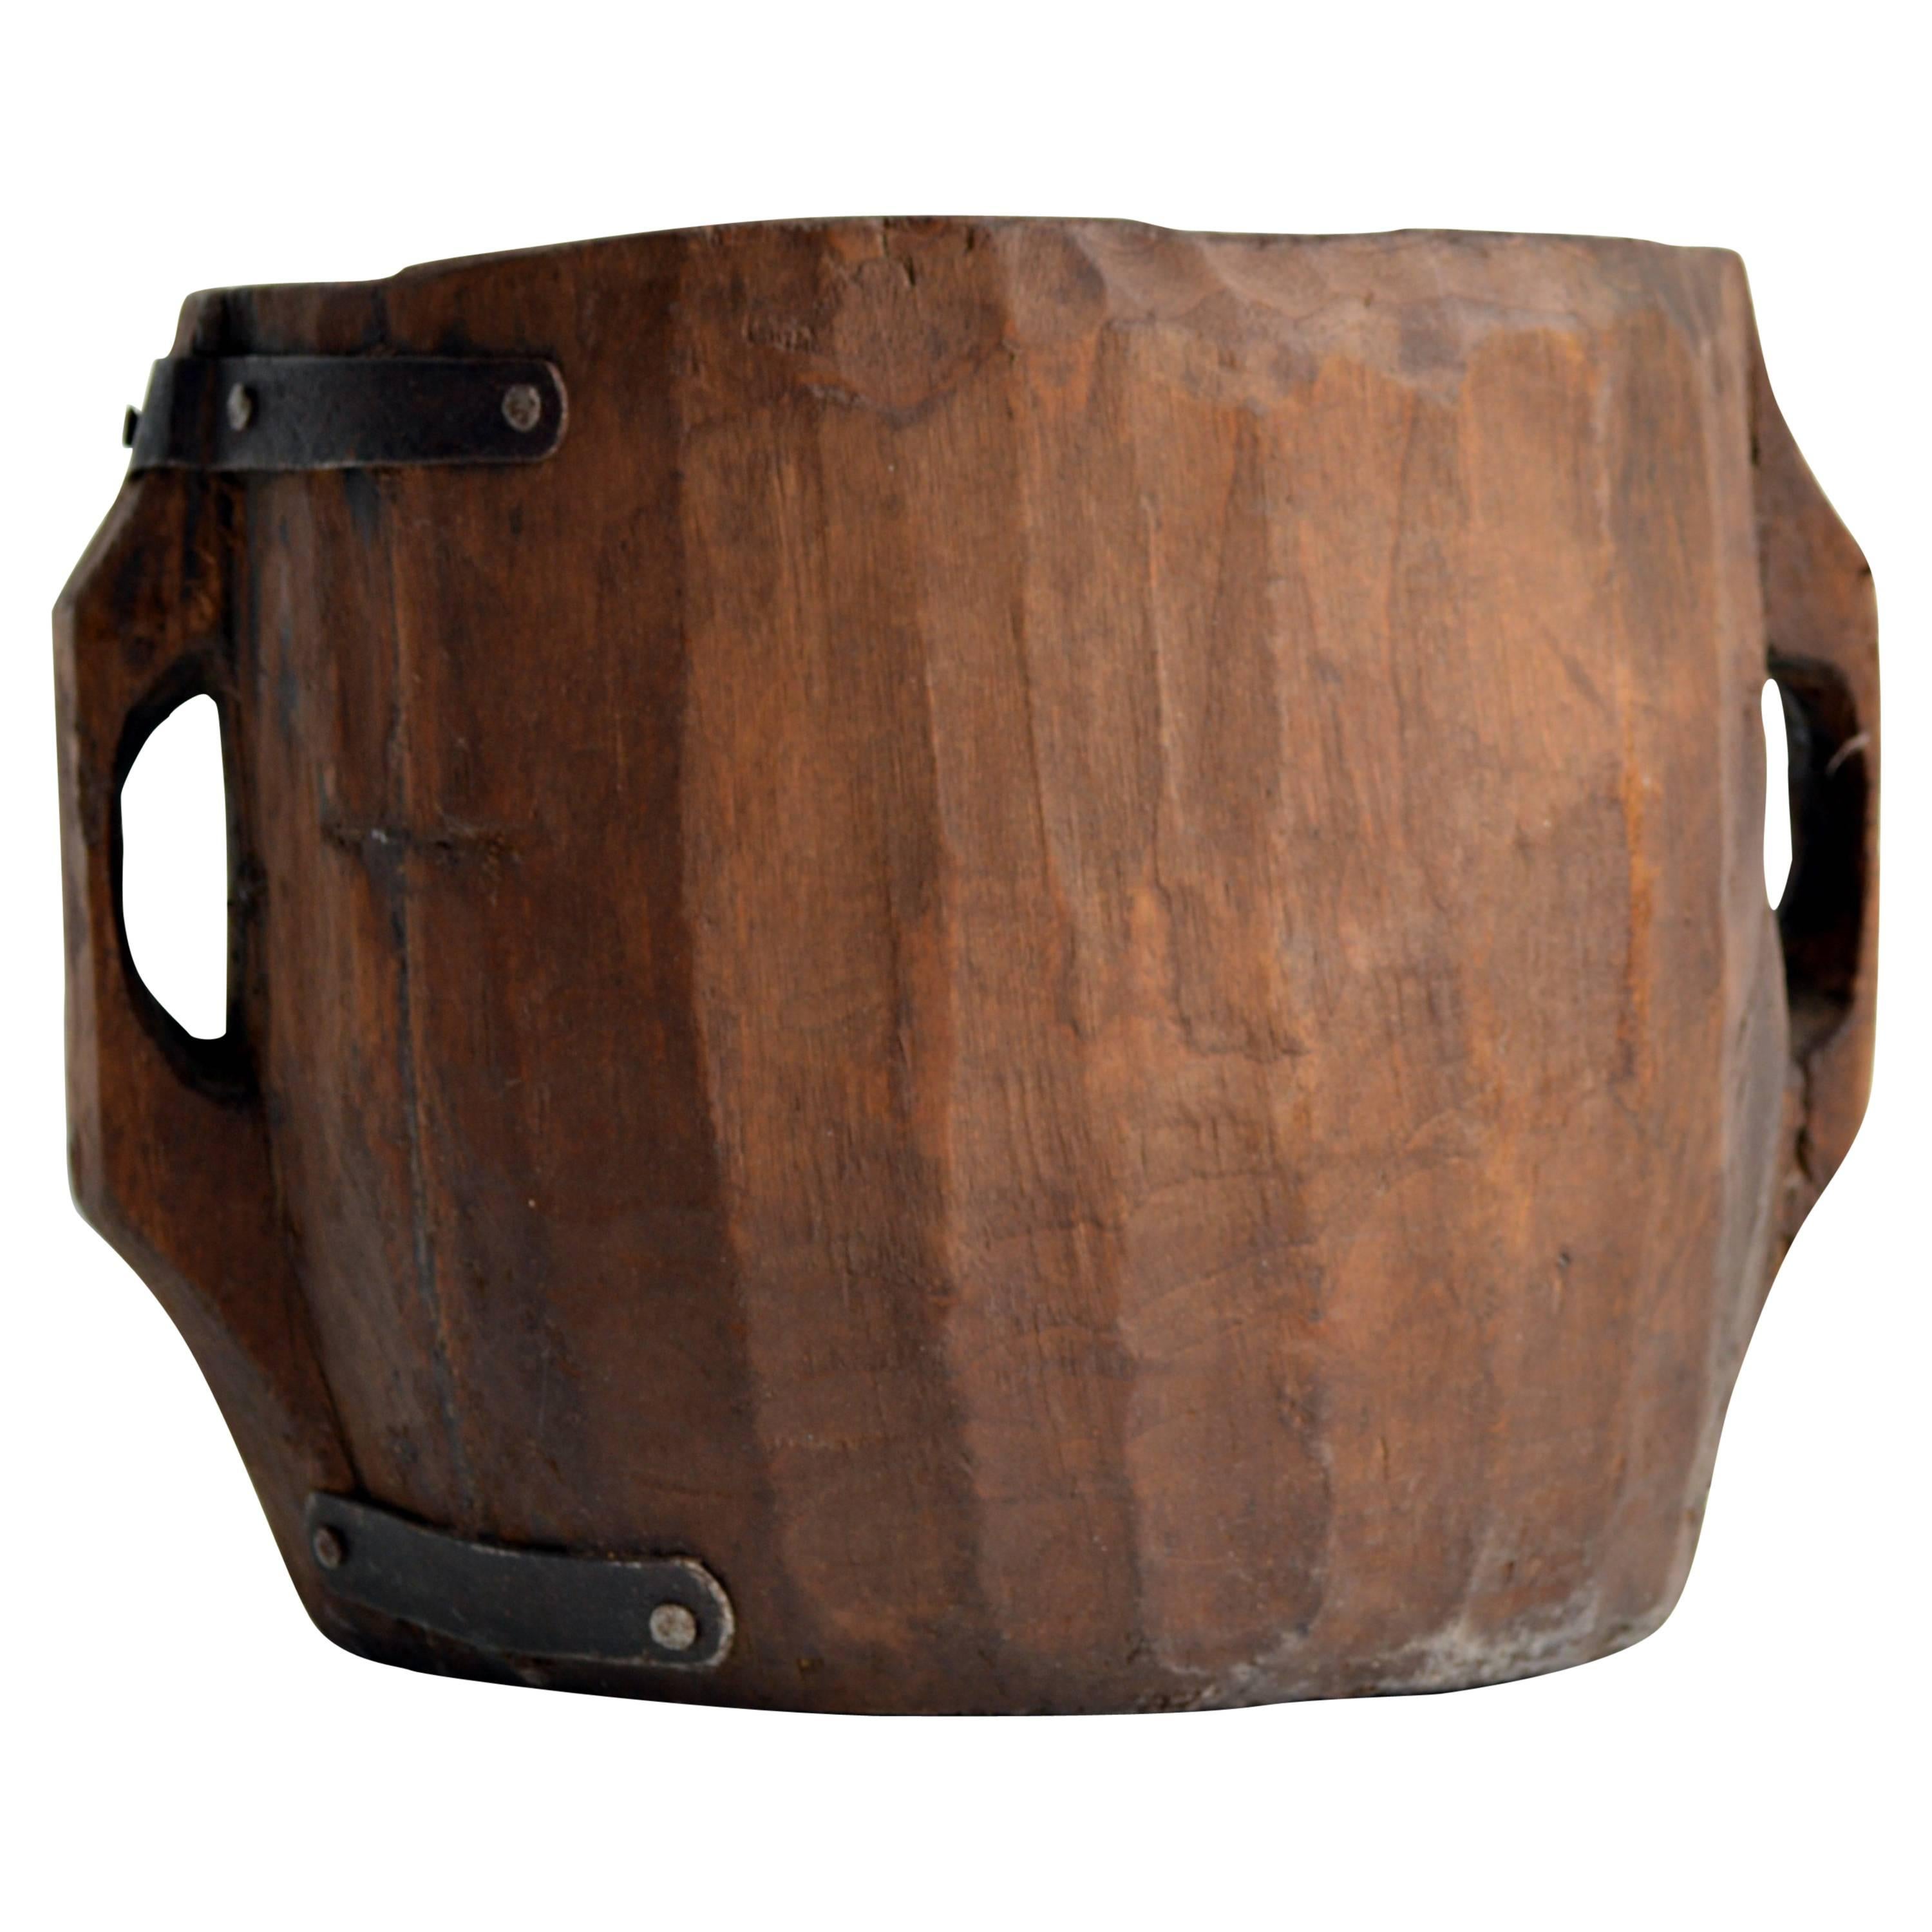 Carved Wood Vessel with Handles